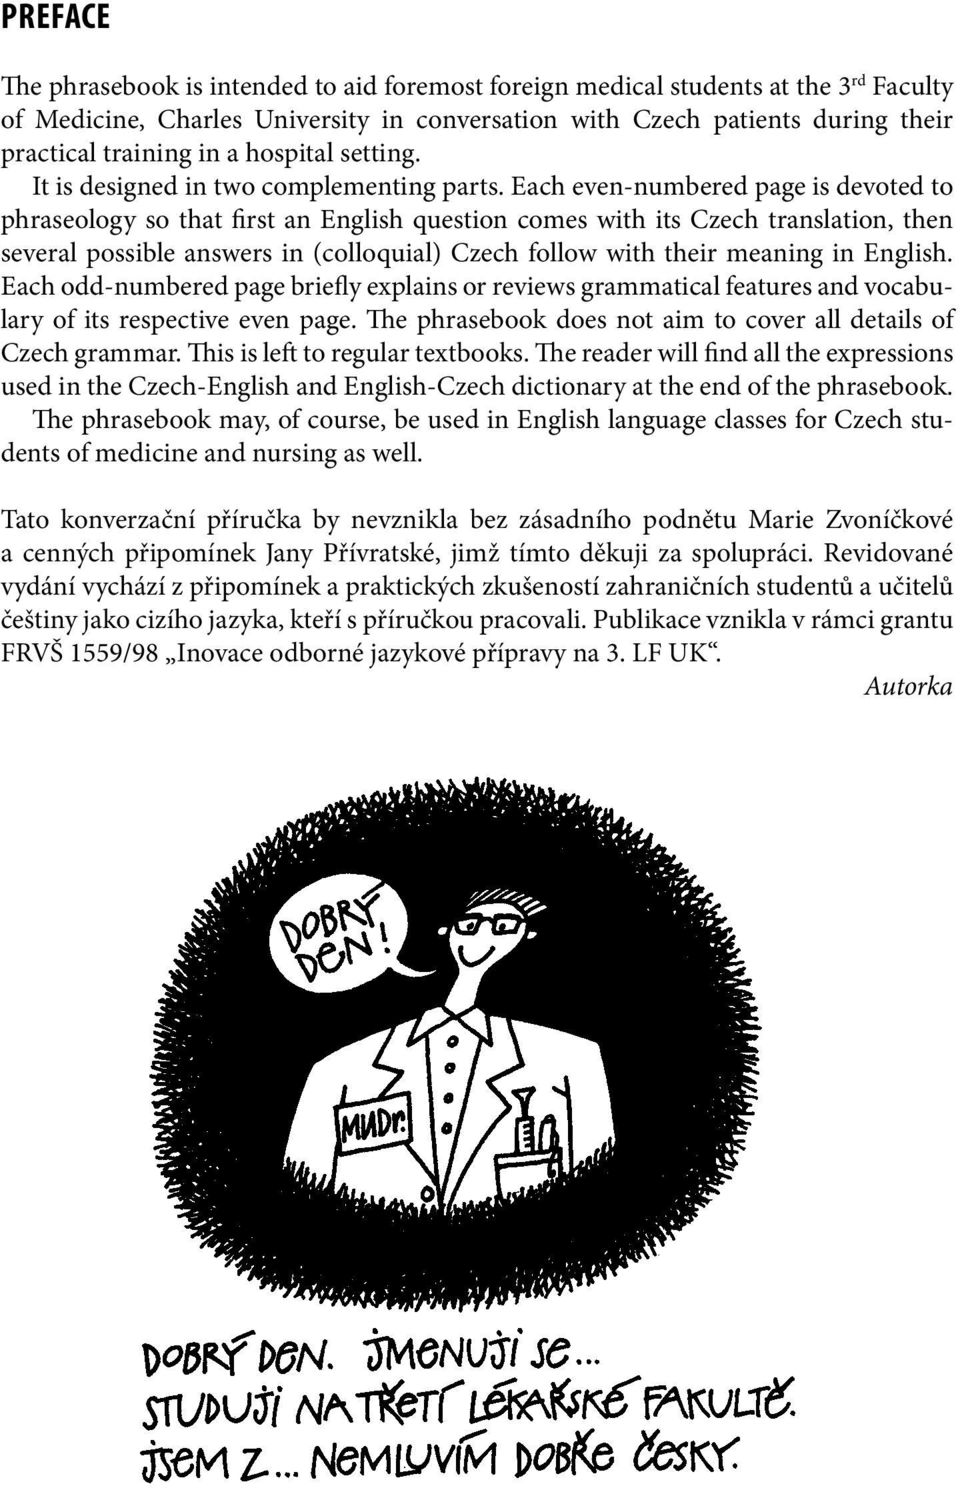 Each even-numbered page is devoted to phraseology so that first an English question comes with its Czech translation, then several possible answers in (colloquial) Czech follow with their meaning in